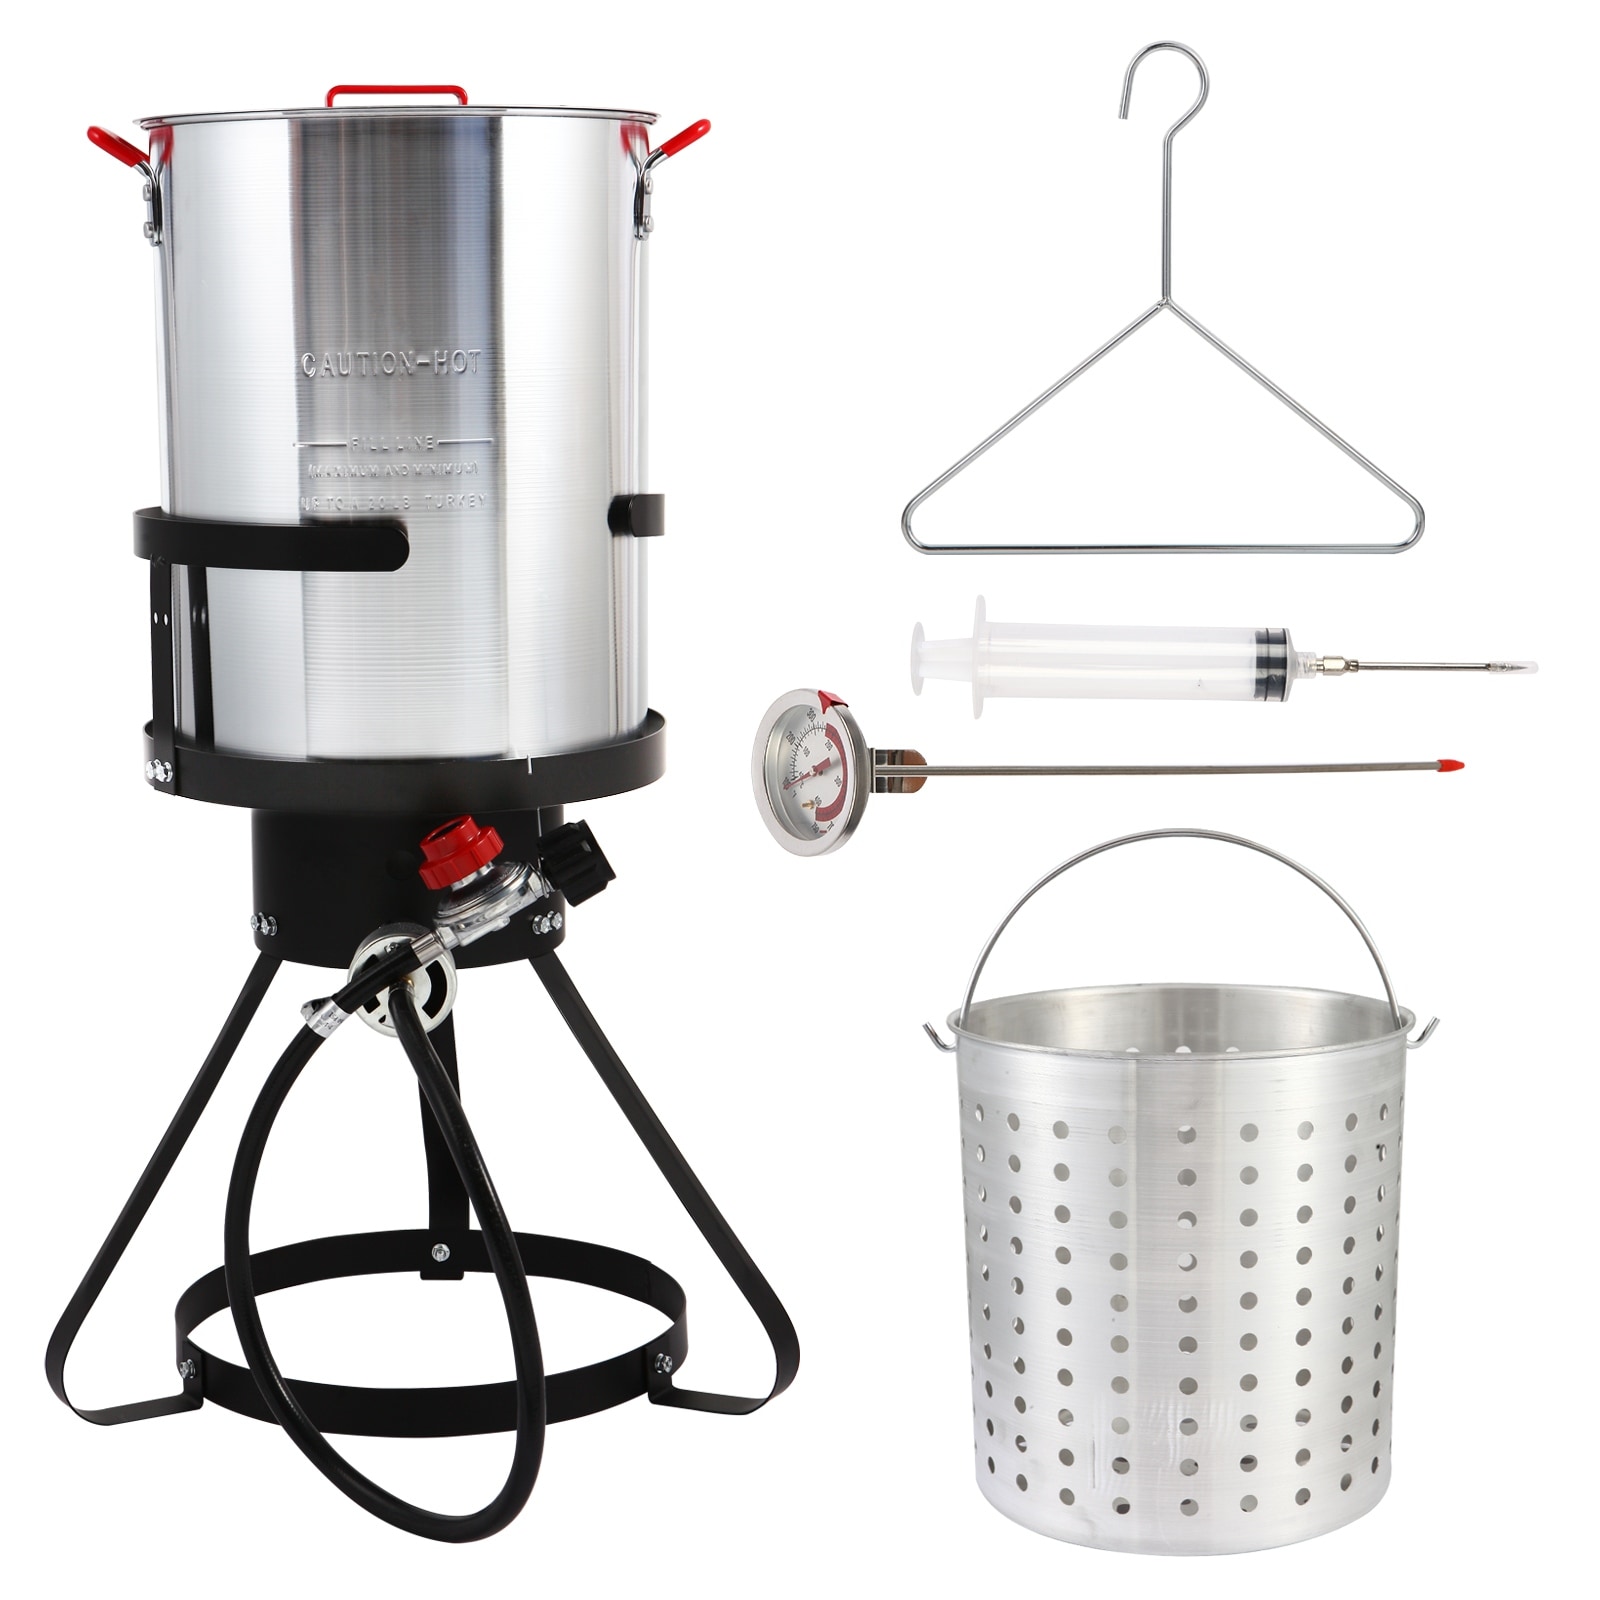 https://ak1.ostkcdn.com/images/products/is/images/direct/ce983aa957de803c62a13470919b60e1d5170022/Aluminum-Turkey-Deep-Fryer-Pot-with-Injector-Thermometer-Kit-and-54%2C-000-BTU-Outdoor-Propane-Stove-Burner-Stand.jpg